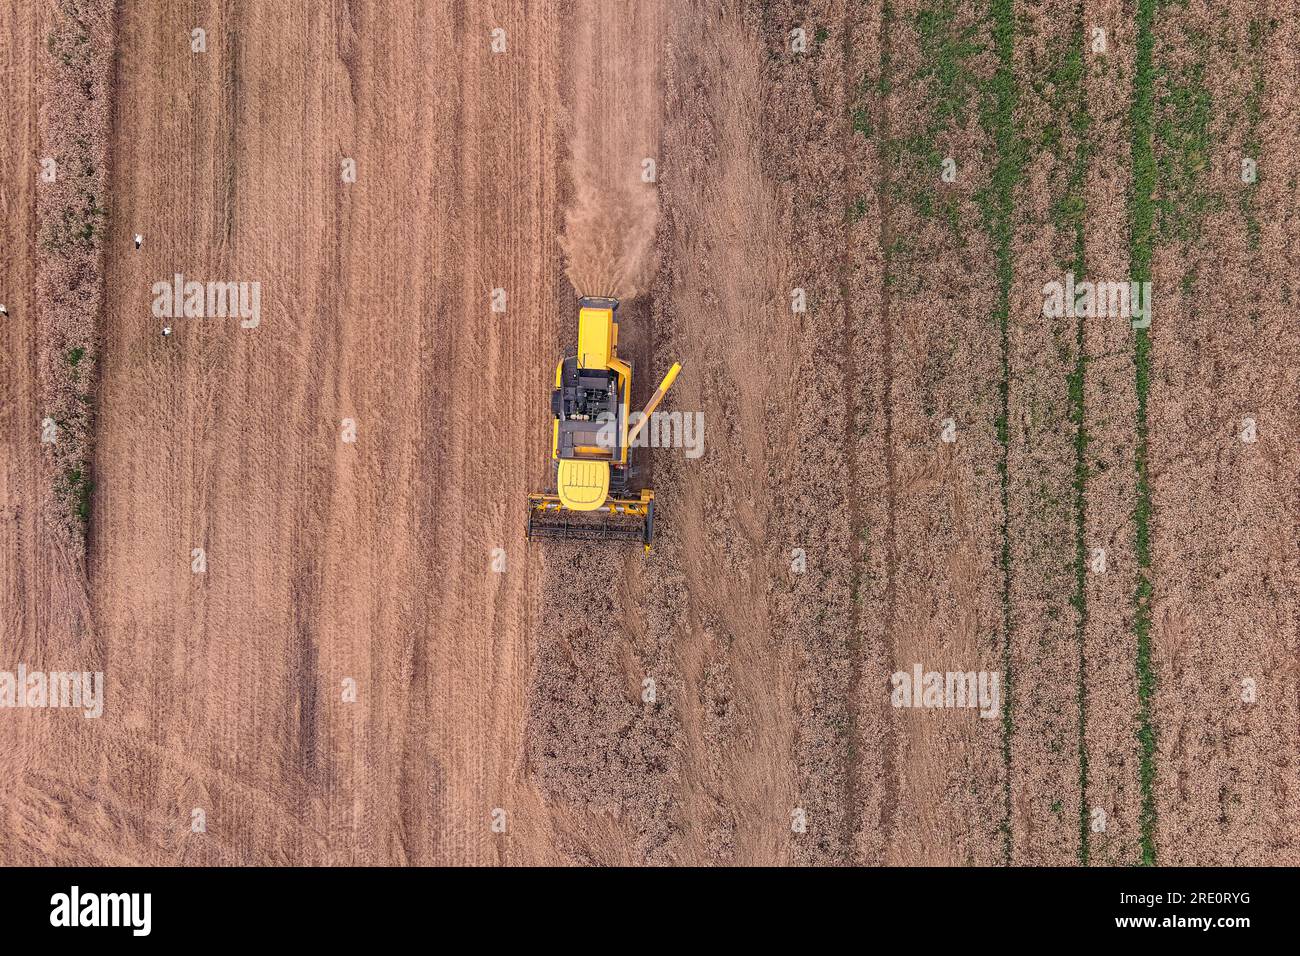 Harvester machine to harvest wheat field working. Agriculture aerial view Stock Photo